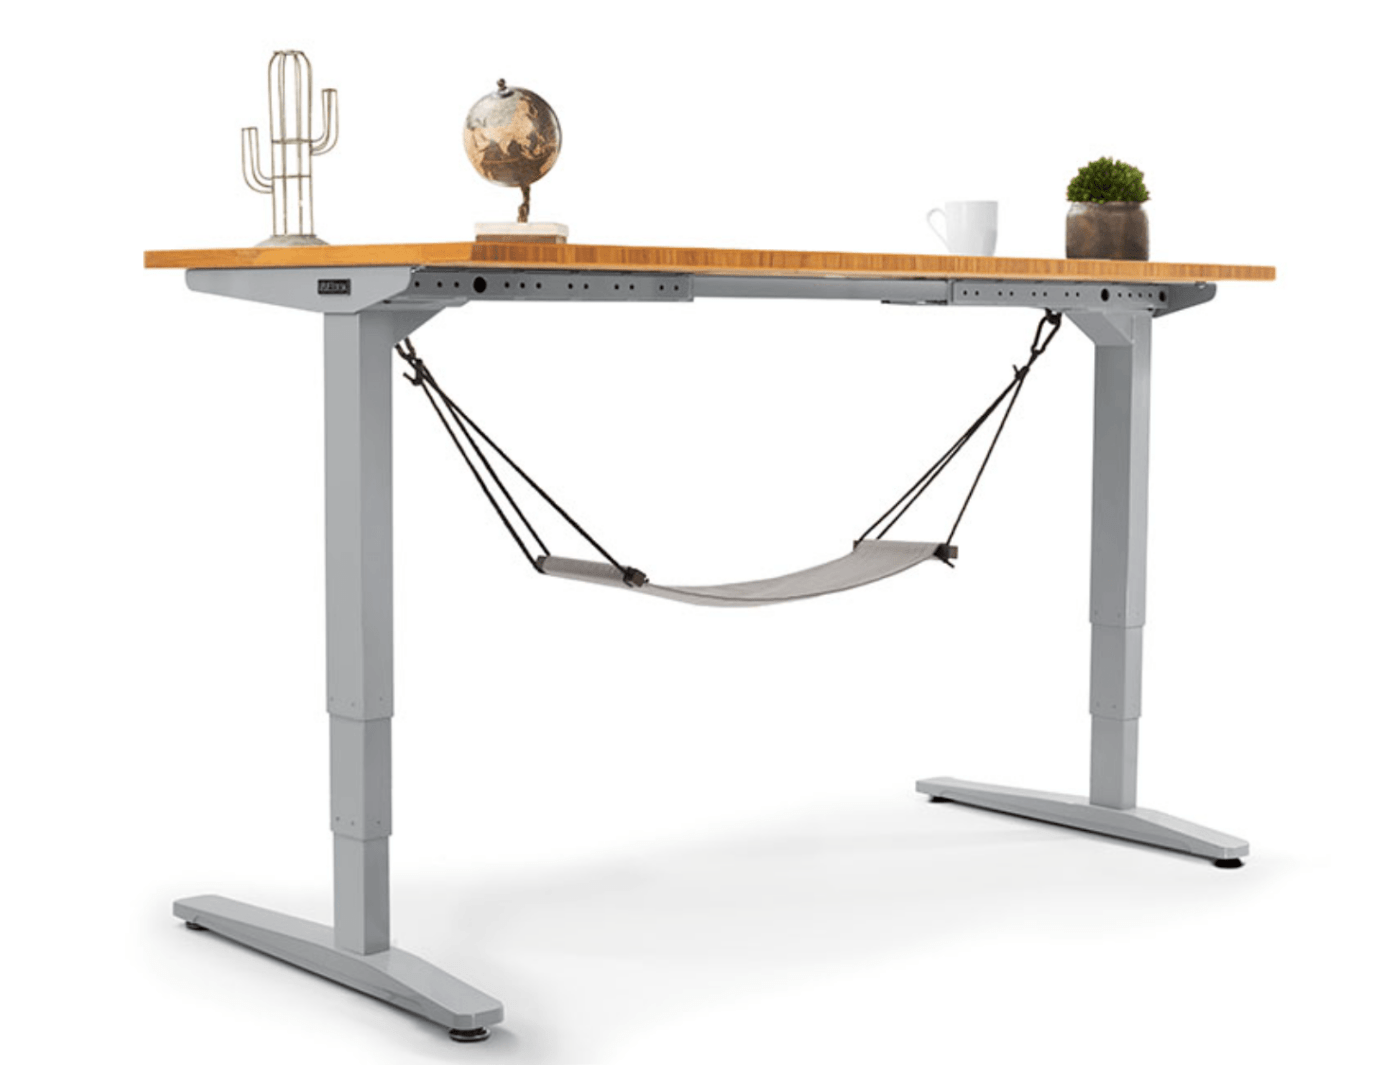 Foot Hammock for your desk at home